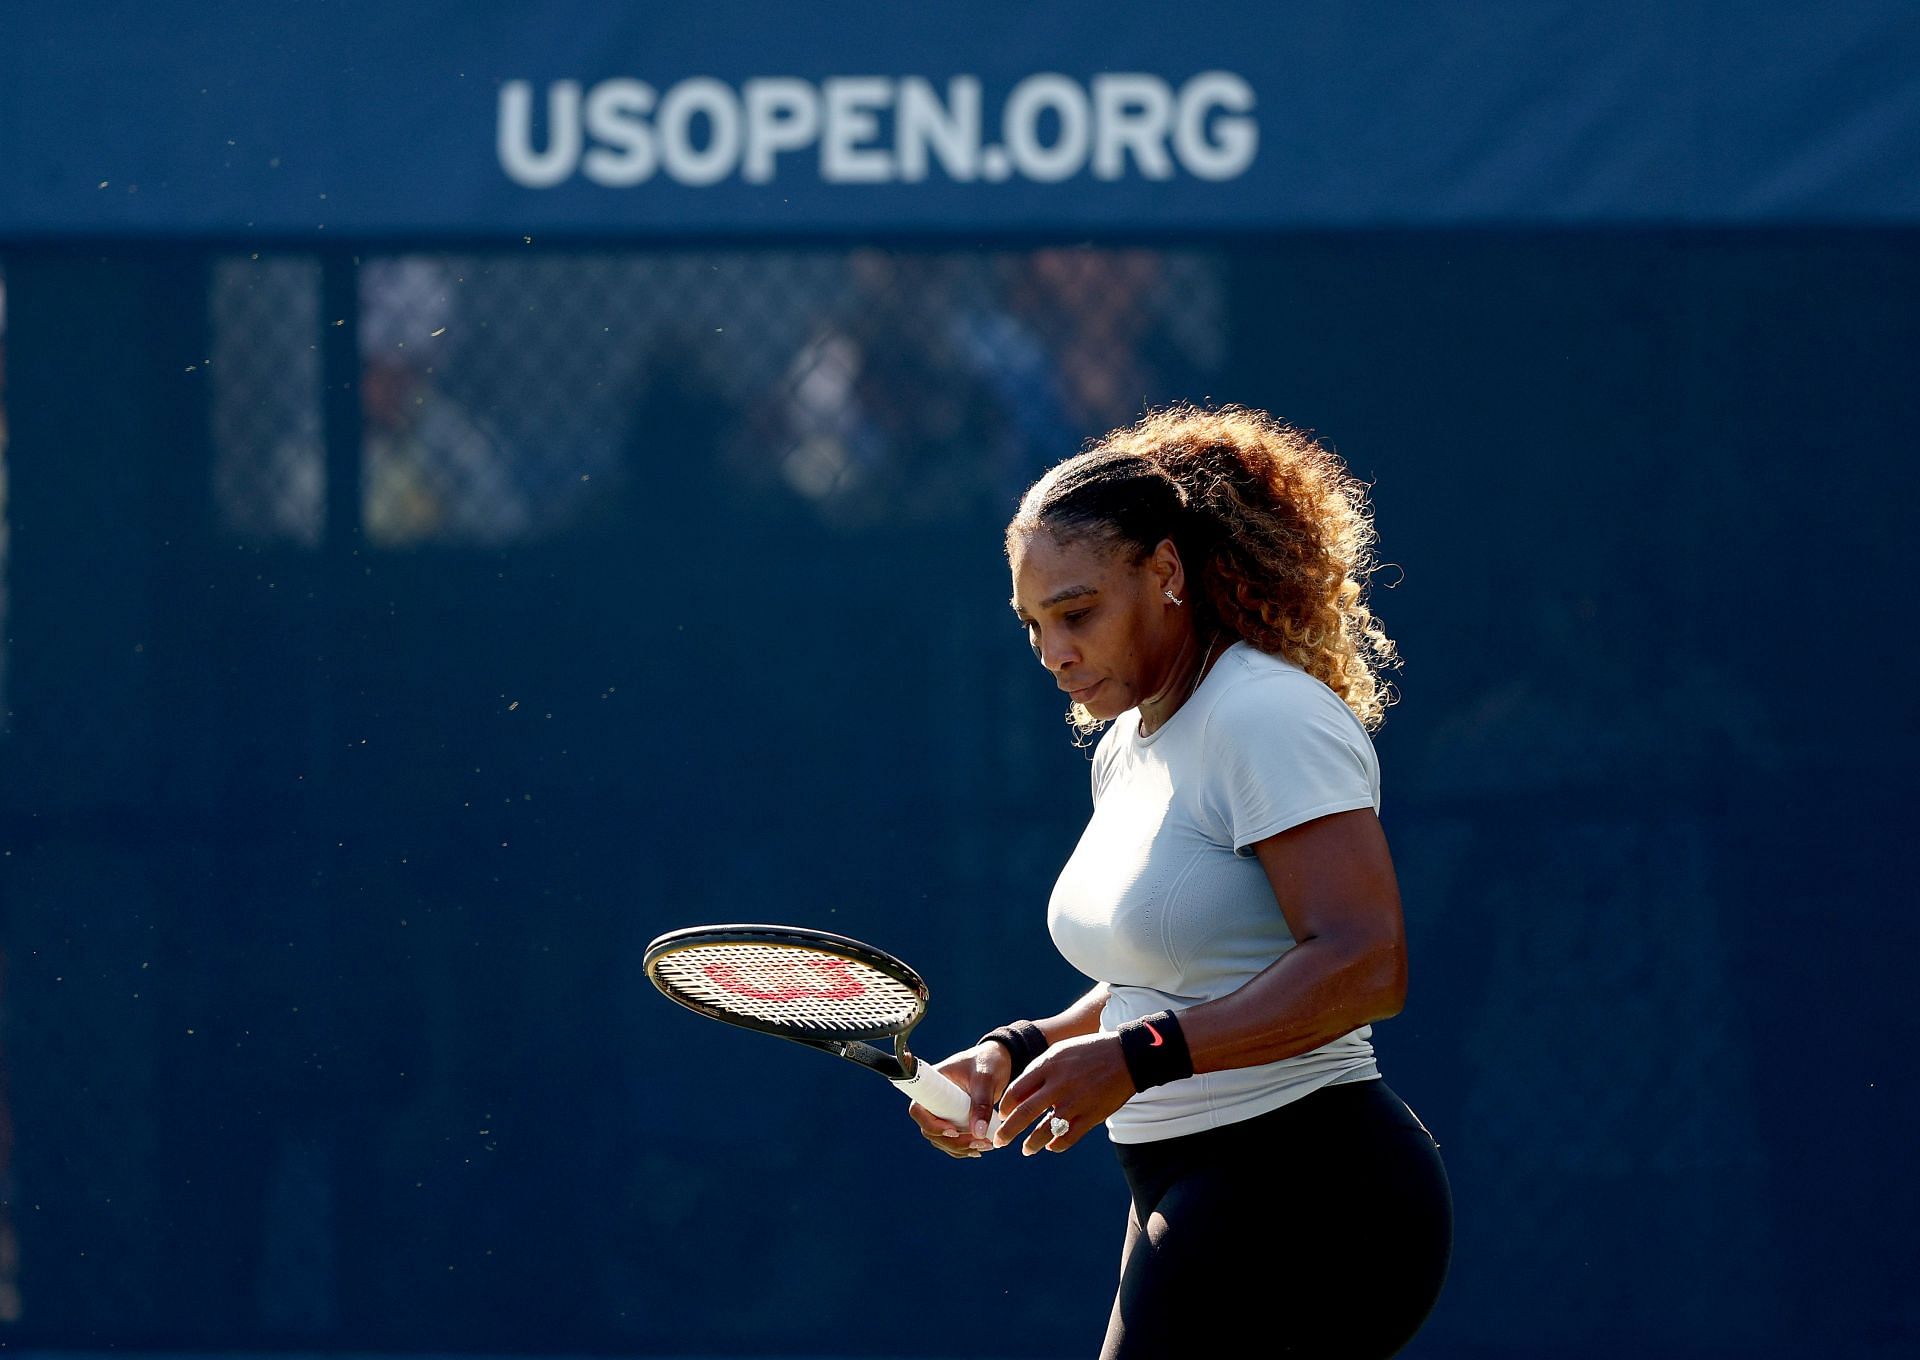 Serena Williams during a training session ahead of the US Open 2022